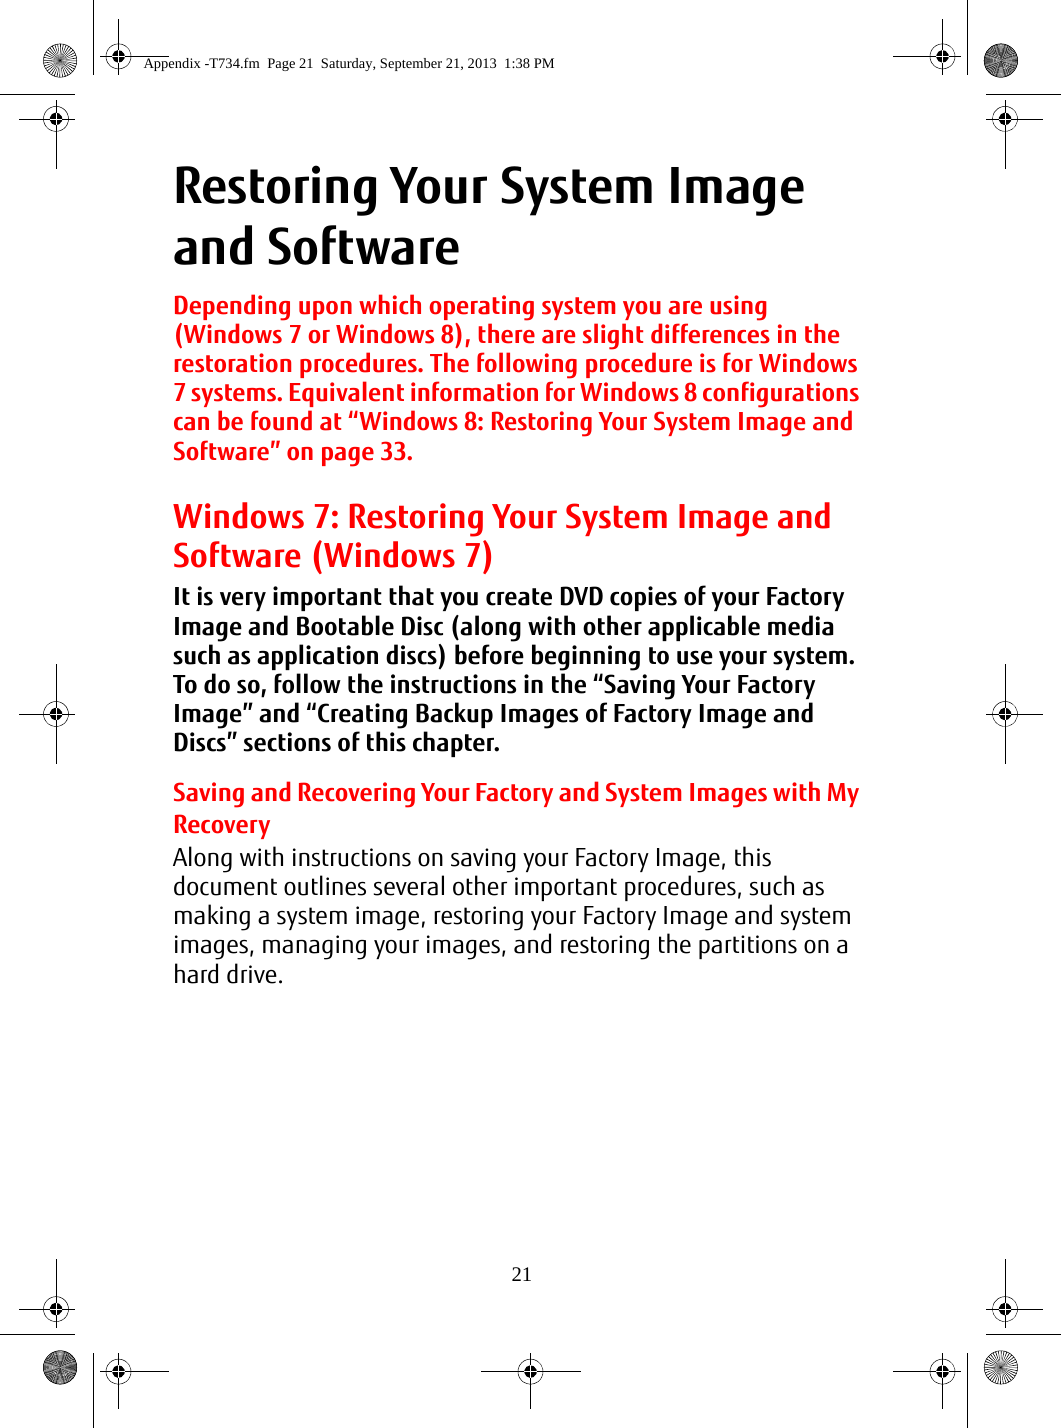 21Restoring Your System Image and SoftwareDepending upon which operating system you are using (Windows 7 or Windows 8), there are slight differences in the restoration procedures. The following procedure is for Windows 7 systems. Equivalent information for Windows 8 configurations can be found at “Windows 8: Restoring Your System Image and Software” on page 33.Windows 7: Restoring Your System Image and Software (Windows 7)It is very important that you create DVD copies of your Factory Image and Bootable Disc (along with other applicable media such as application discs) before beginning to use your system. To do so, follow the instructions in the “Saving Your Factory Image” and “Creating Backup Images of Factory Image and Discs” sections of this chapter.Saving and Recovering Your Factory and System Images with My RecoveryAlong with instructions on saving your Factory Image, this document outlines several other important procedures, such as making a system image, restoring your Factory Image and system images, managing your images, and restoring the partitions on a hard drive.Appendix -T734.fm  Page 21  Saturday, September 21, 2013  1:38 PM